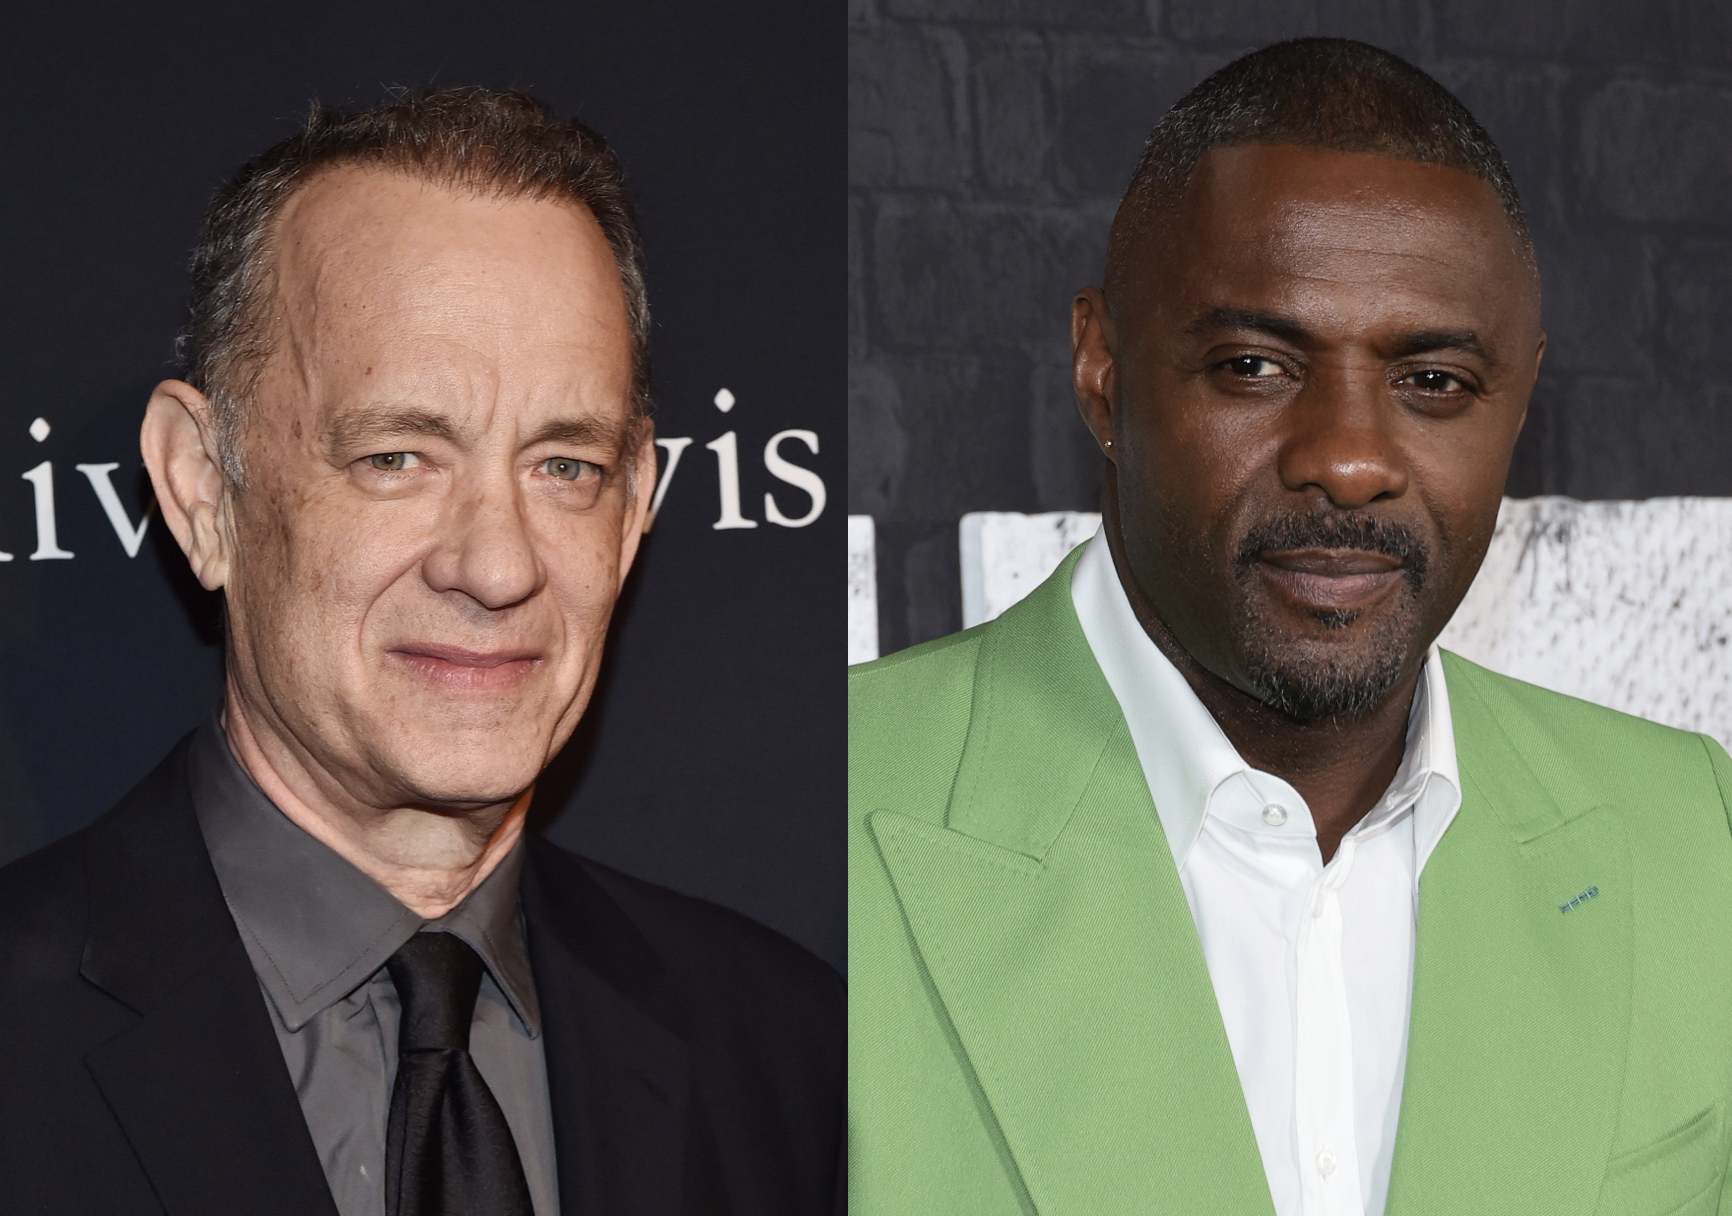 Are We Here For It? Tom Hanks Reveals He Wants Idris Elba To Play The Next James Bond